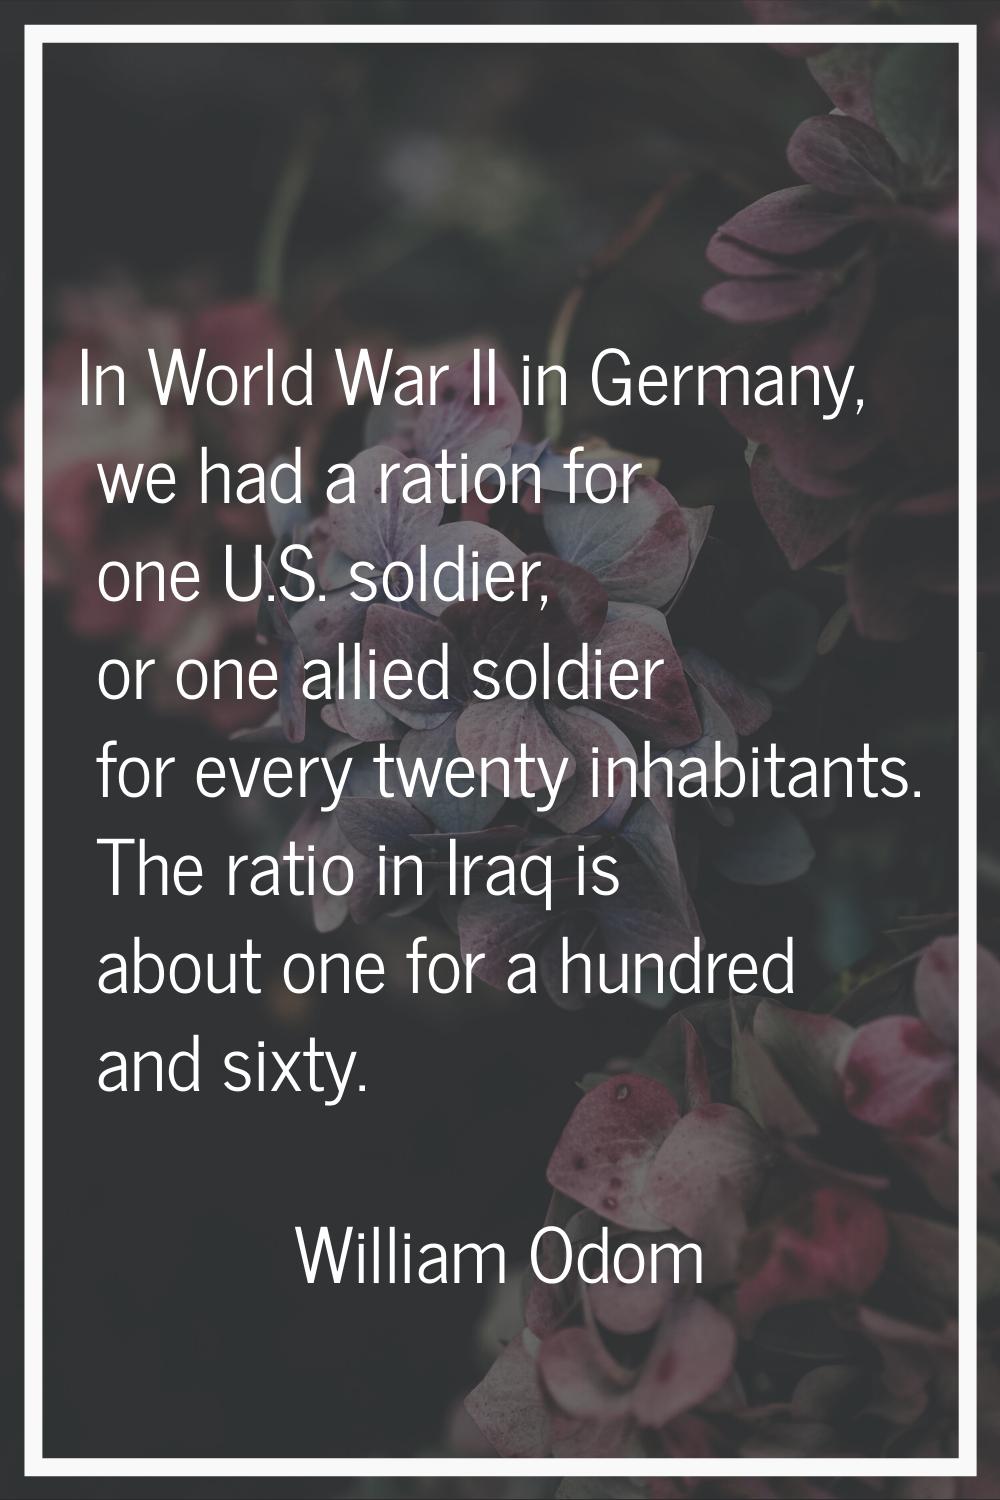 In World War II in Germany, we had a ration for one U.S. soldier, or one allied soldier for every t